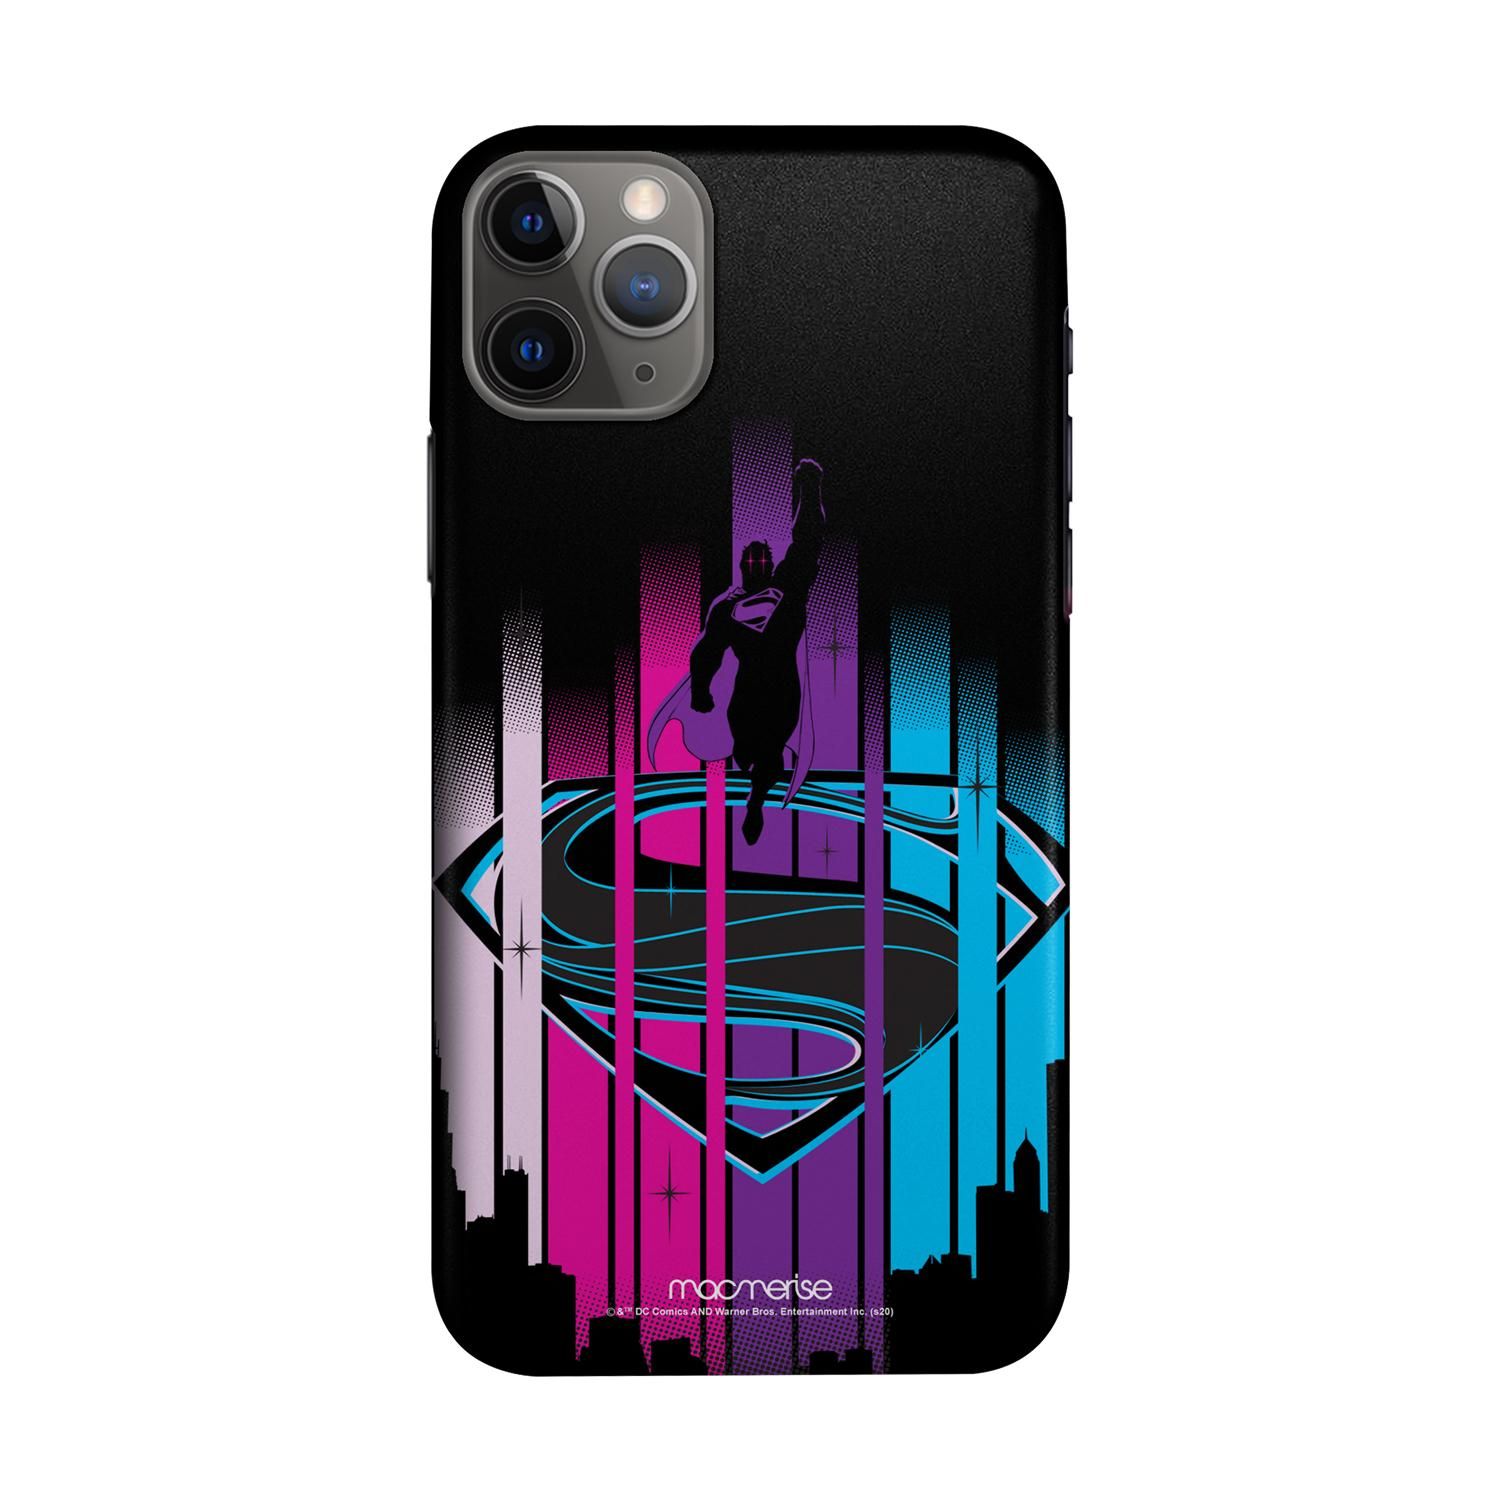 Buy Symbol of Hope - Sleek Phone Case for iPhone 11 Pro Max Online